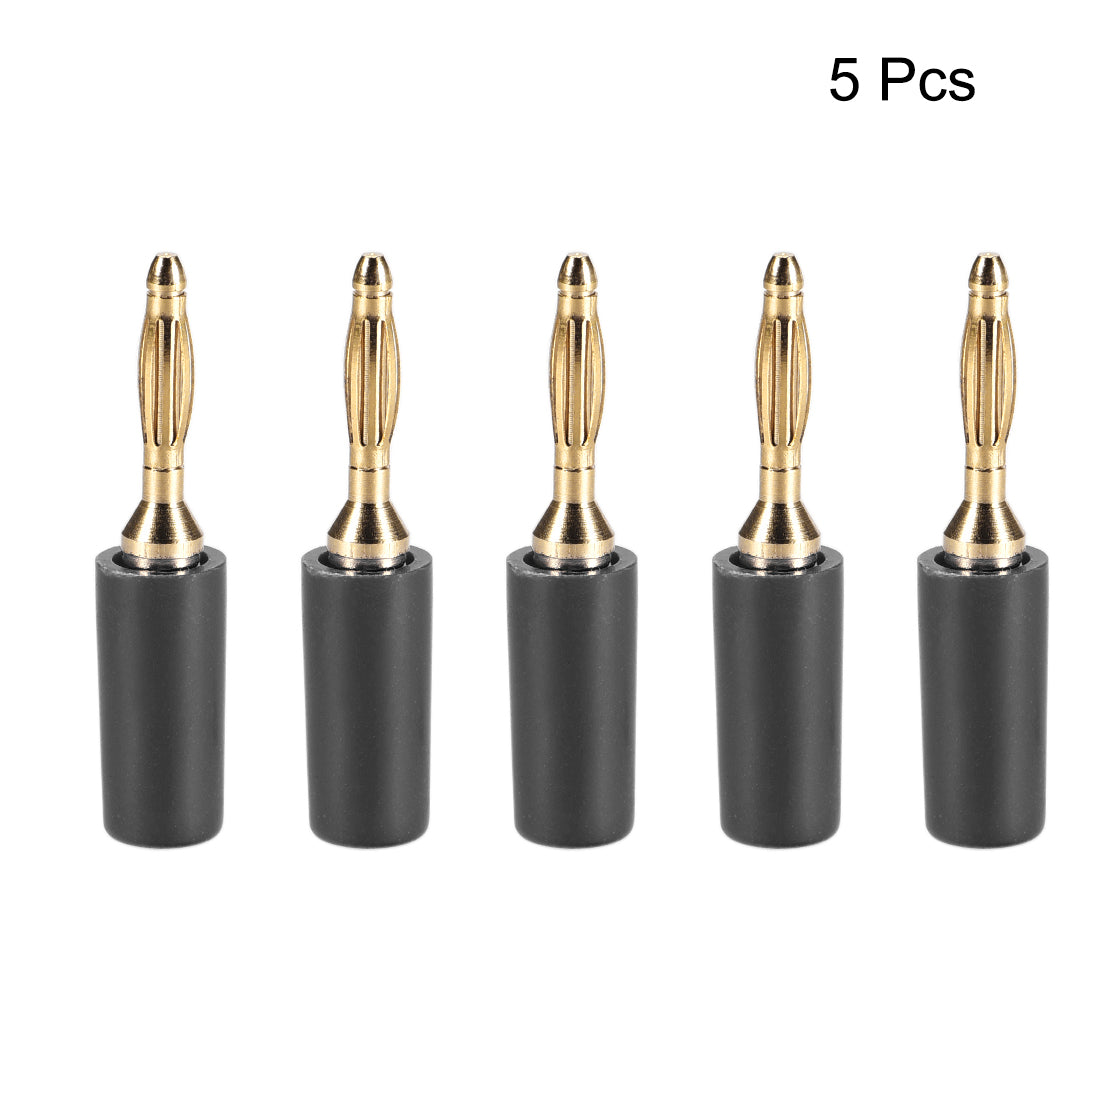 uxcell Uxcell 2mm Banana Speaker Wire Cable Plugs Connectors Gold Black 5pcs Jack Connector